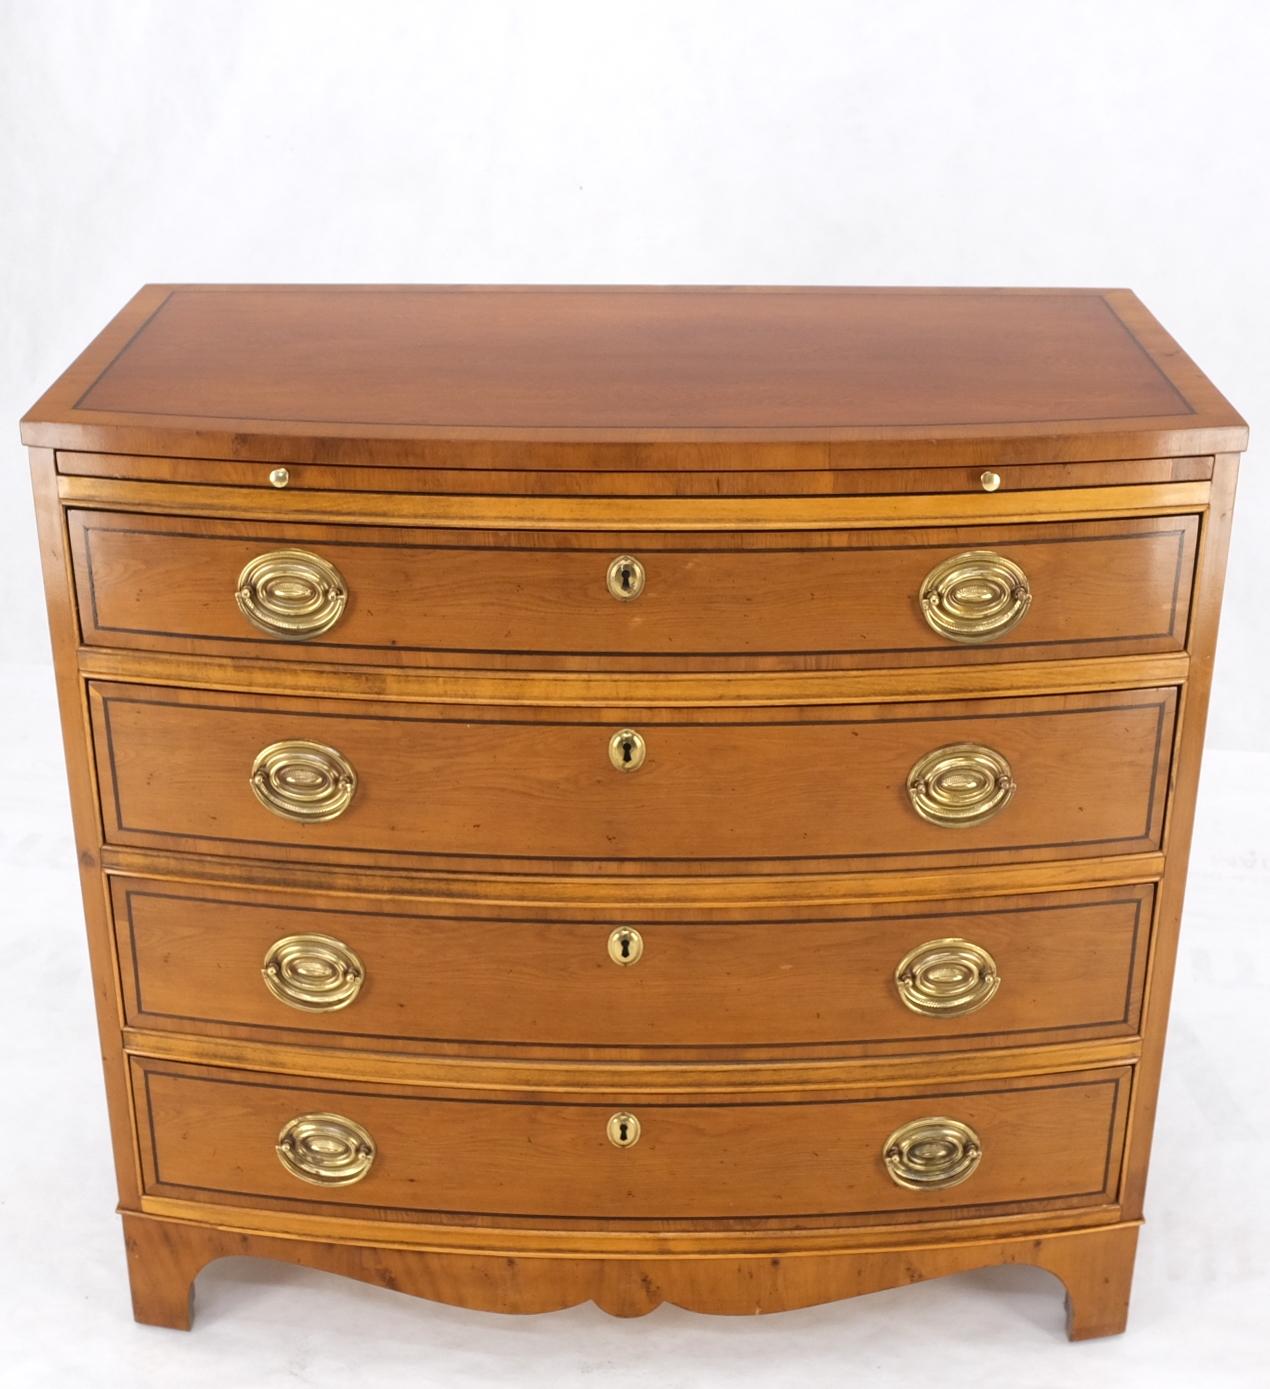 Mahogany Bow Front 4 Drawers Pull Out Tray Brass Hardware Bachelor Chest Dresser 6